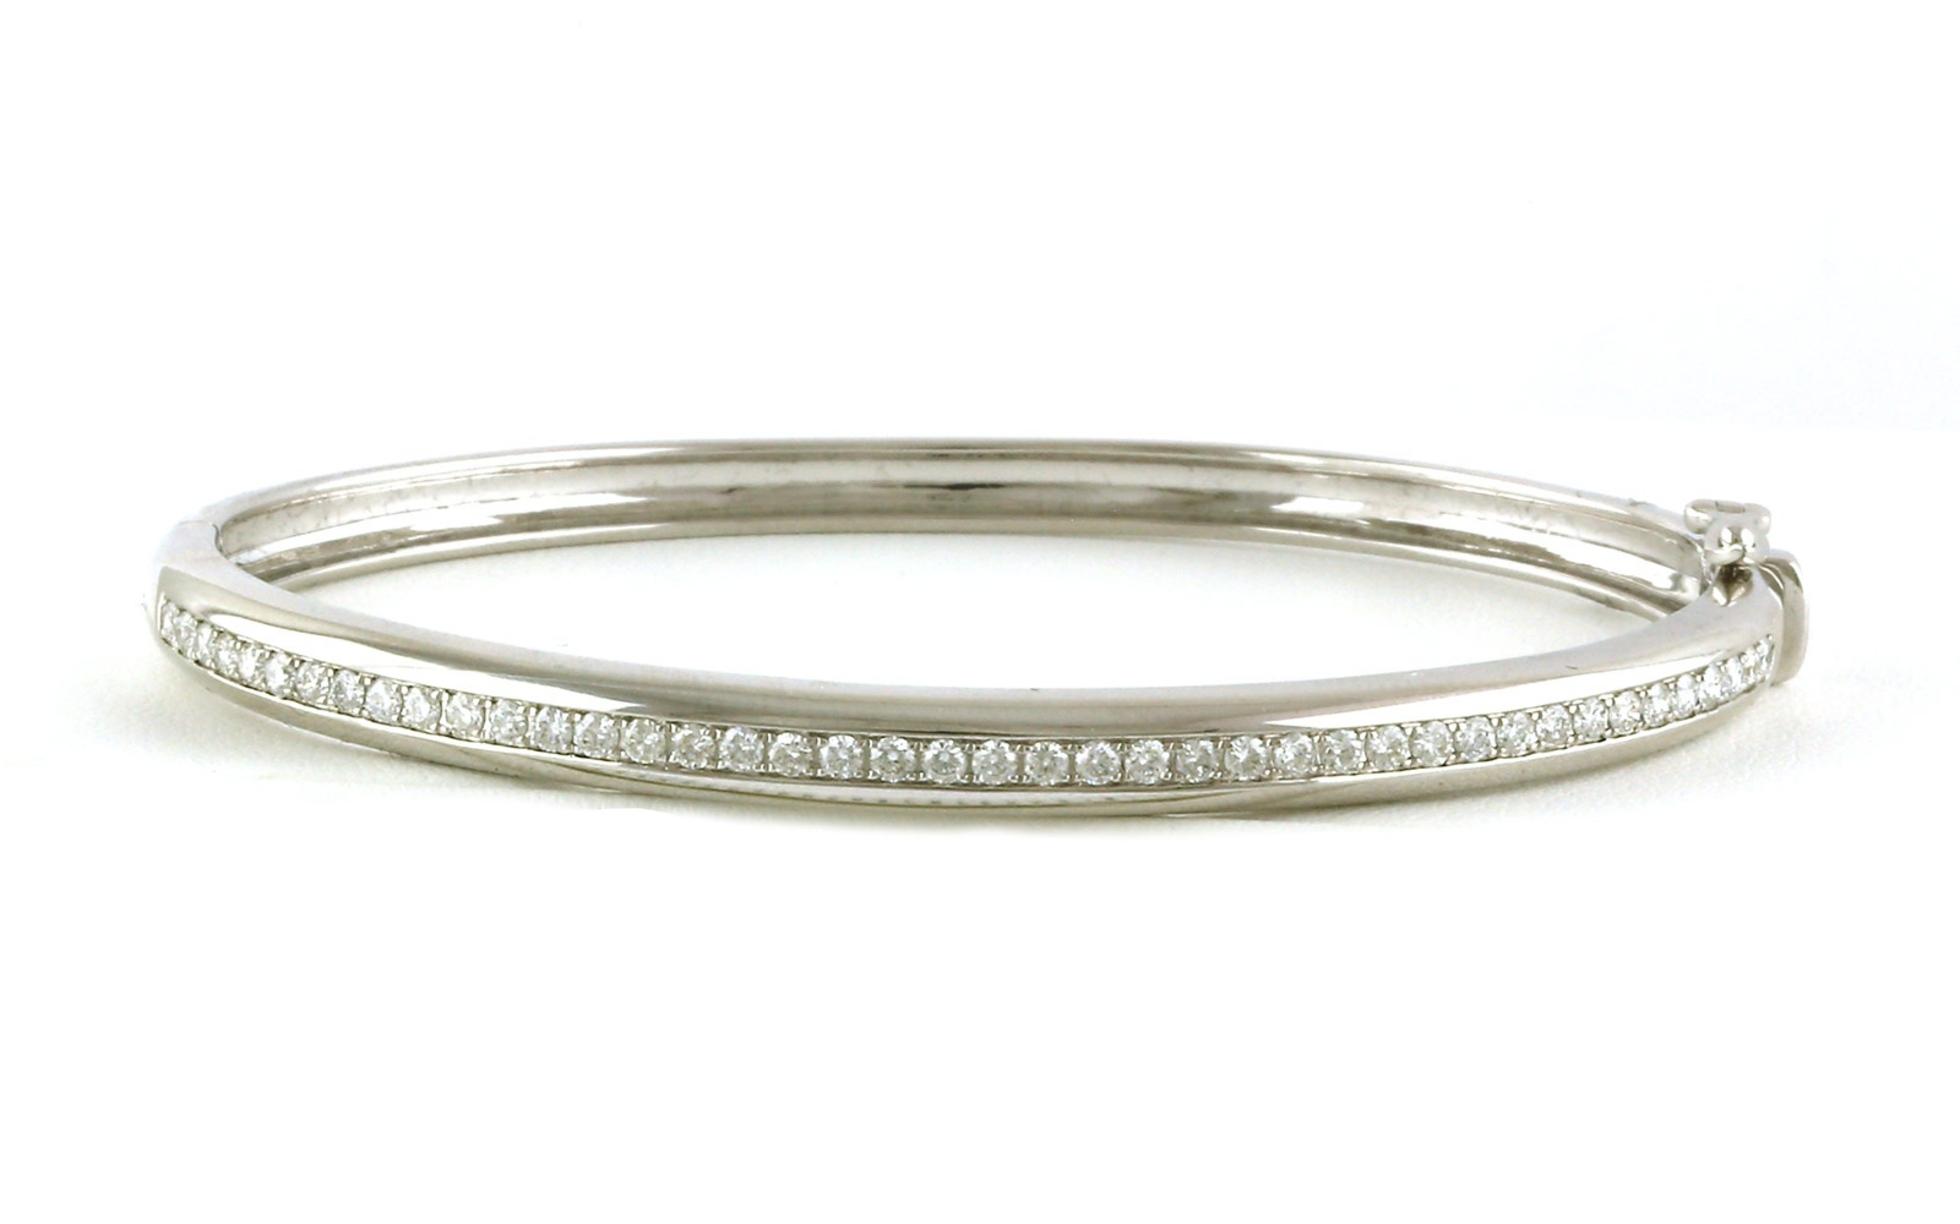 Channel-set Diamond Hinged Bangle Bracelet in White Gold (0.76cts TWT)